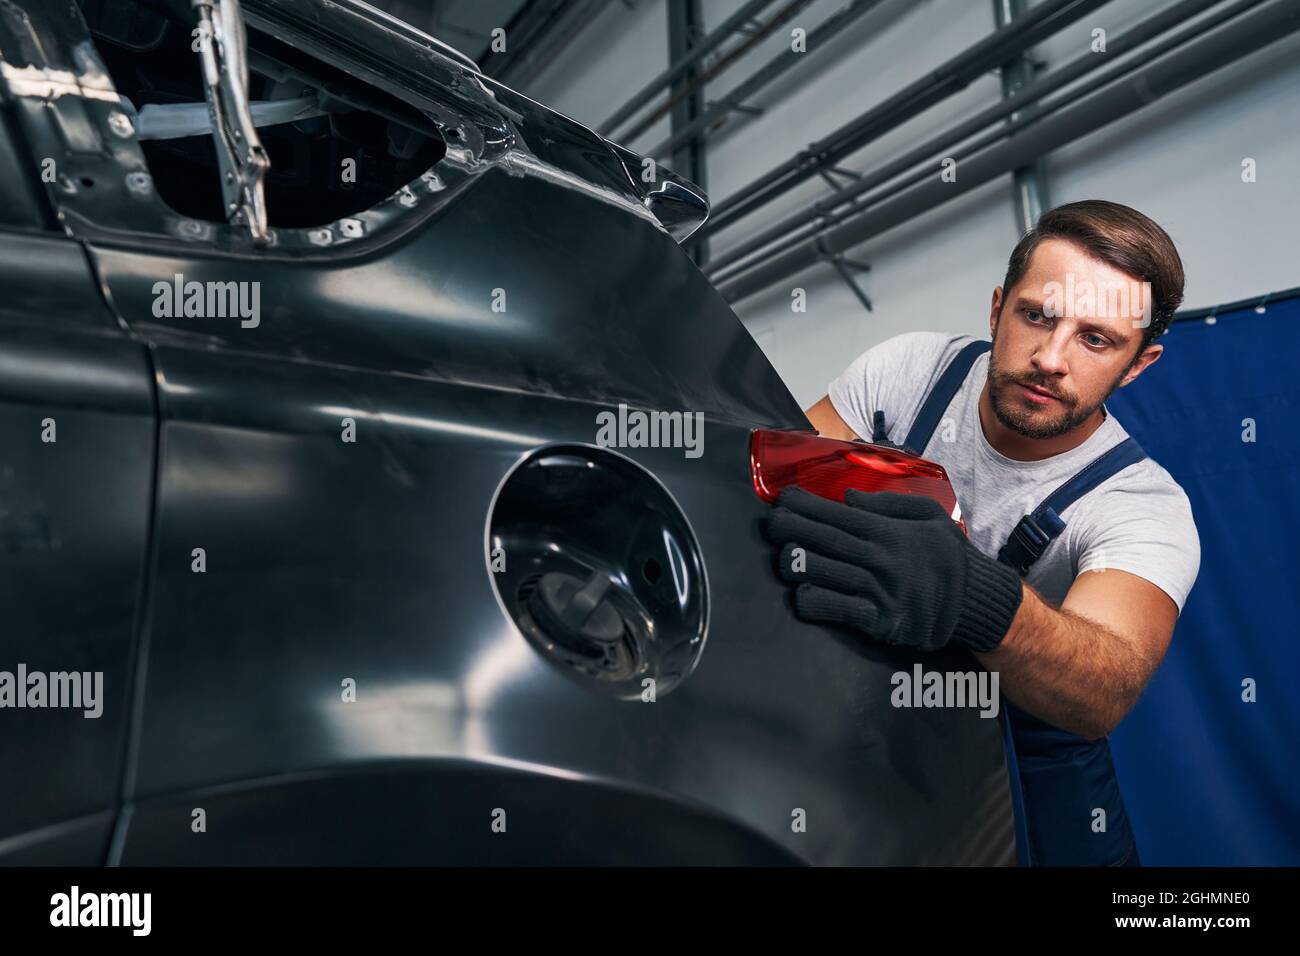 Repairman straightening rear light in its place Stock Photo